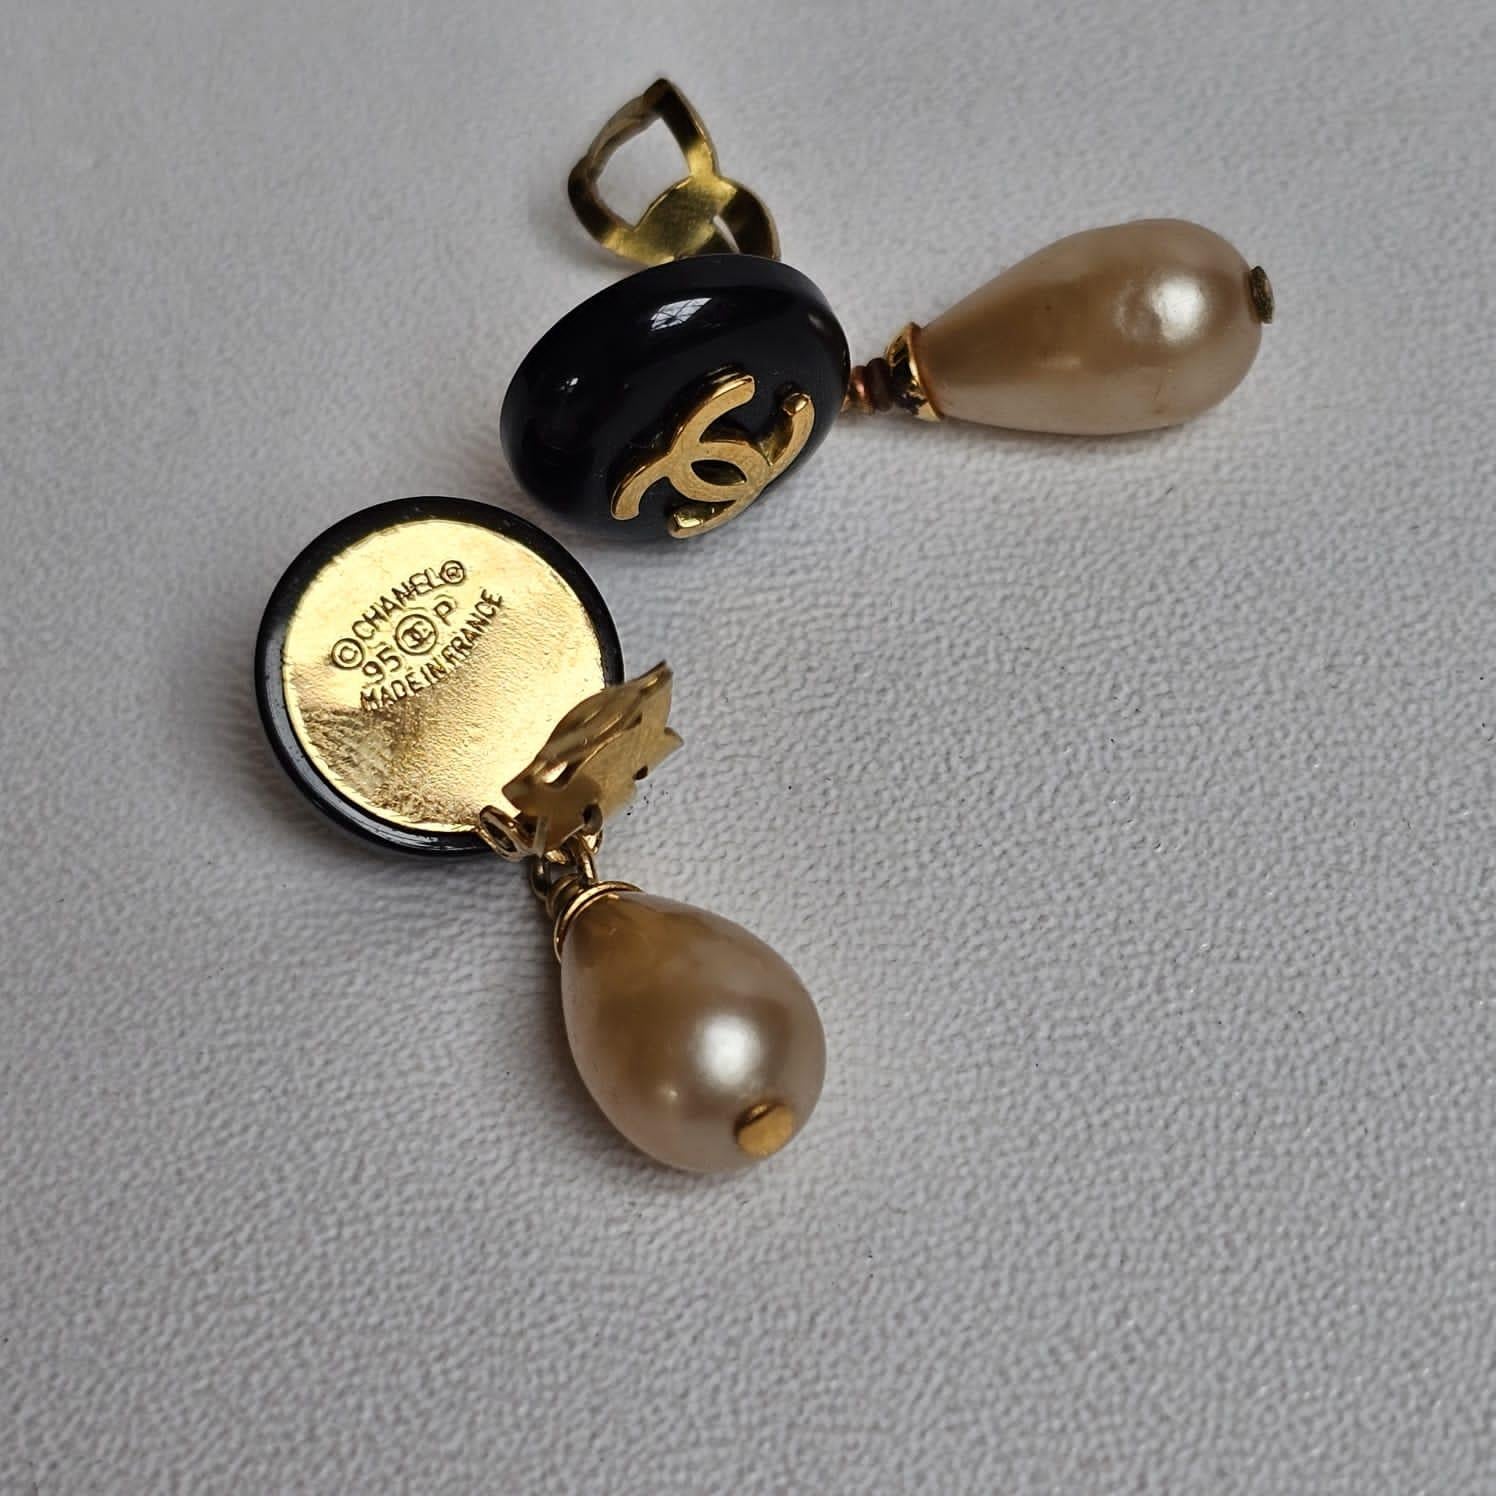 Rare pearl drop earrings from chanel vintage collection. Very classy pair and easy to wear. From 1995. Comes with non-chanel replacement box and dust bag.